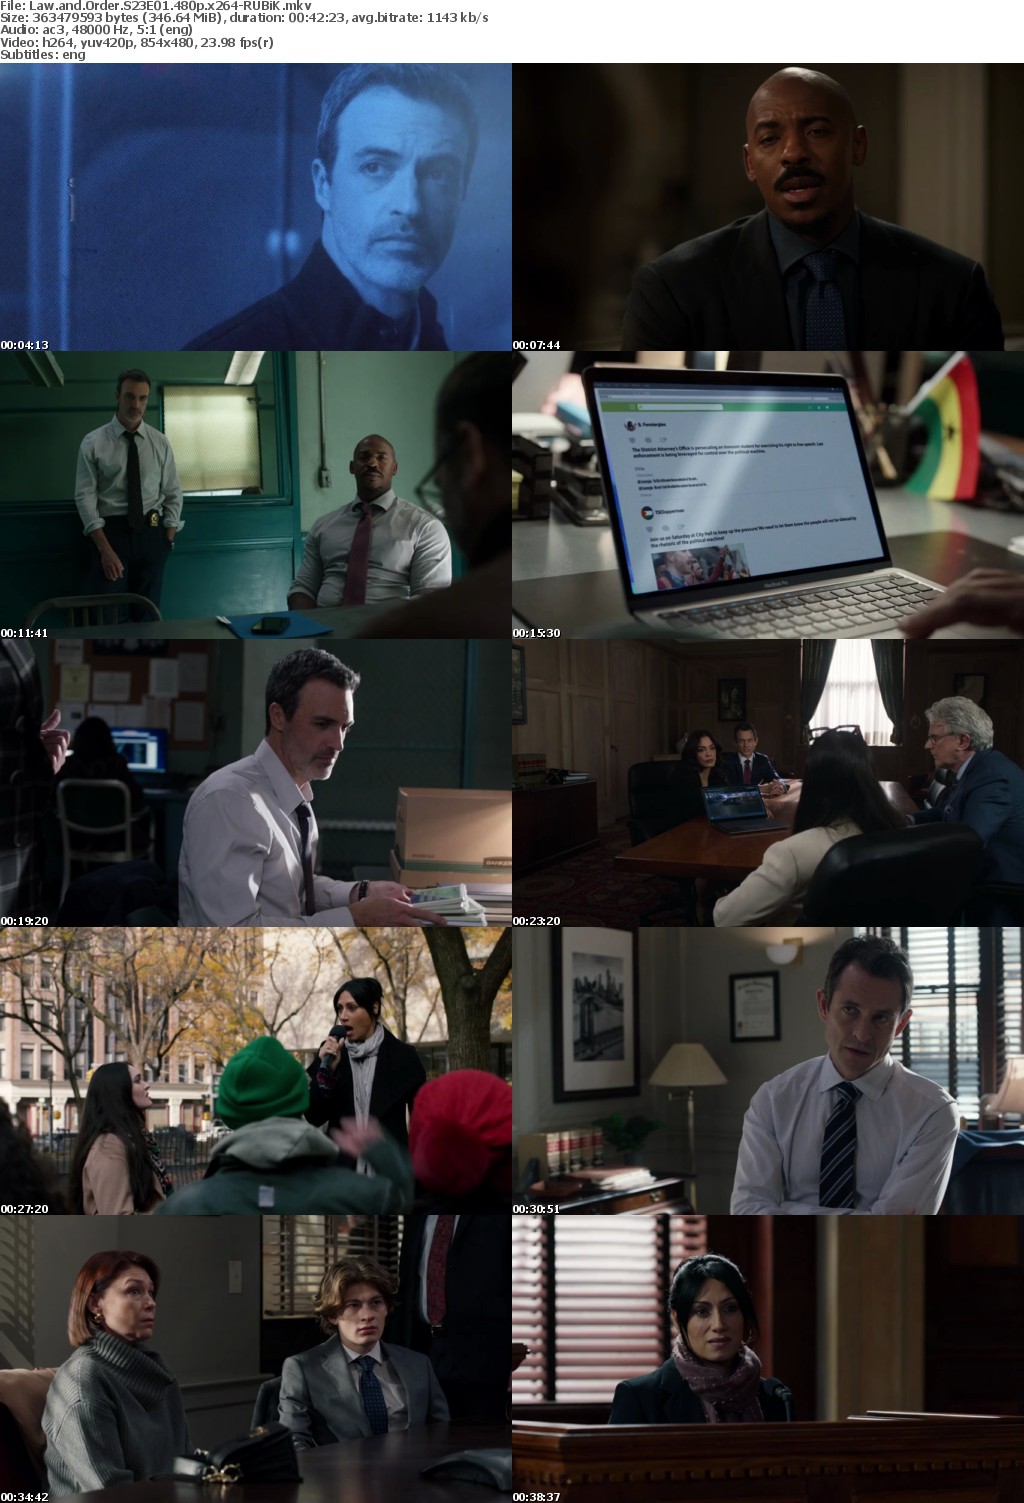 Law and Order S23E01 480p x264-RUBiK Saturn5